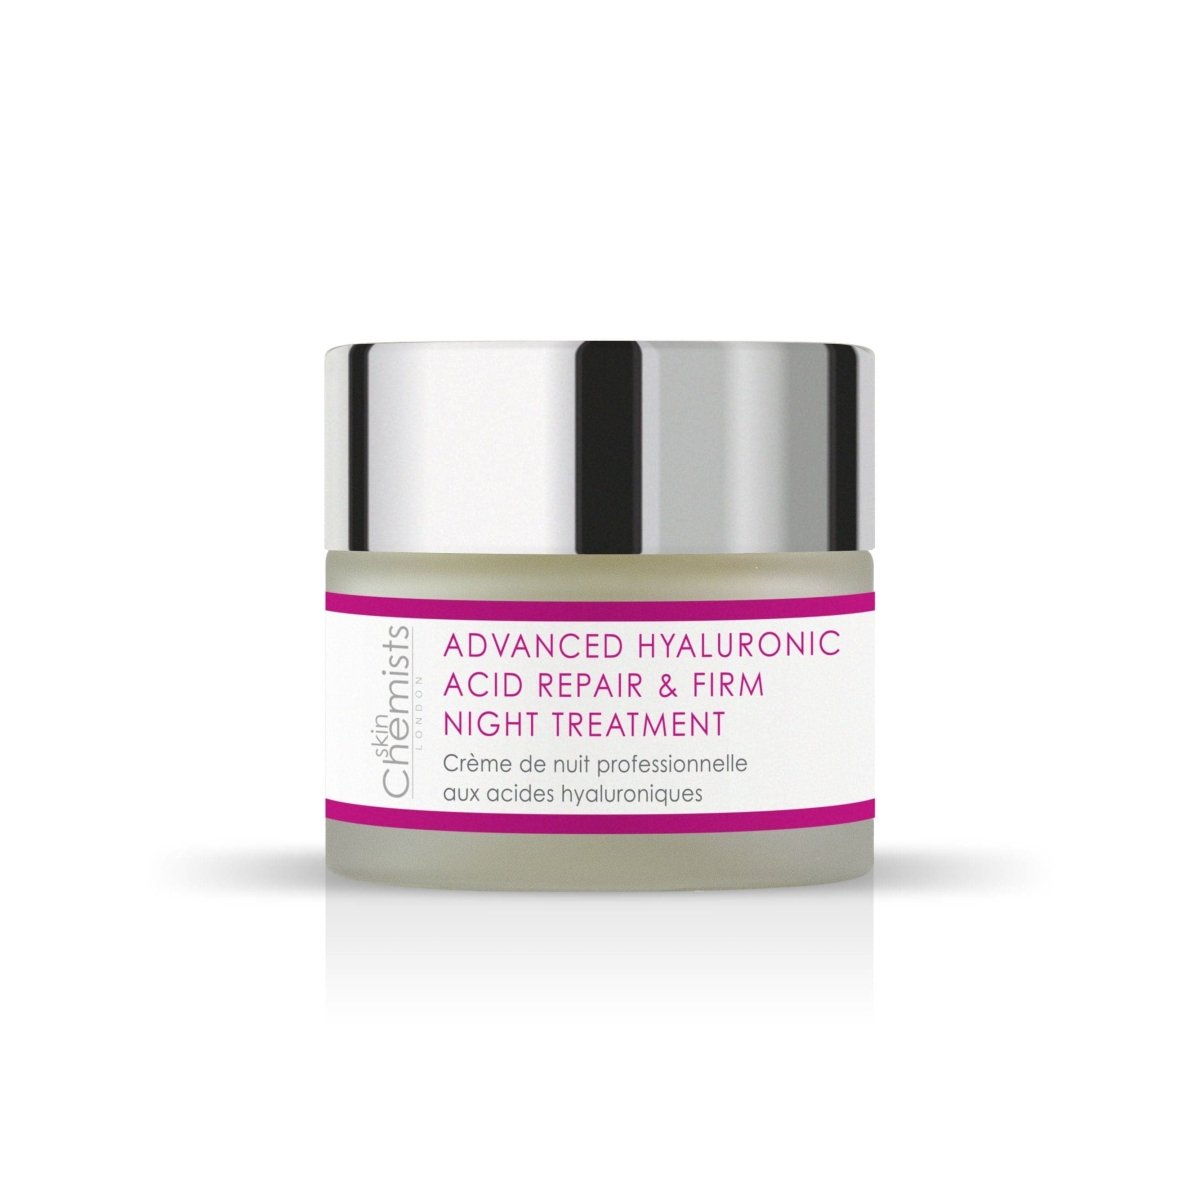 Advanced Hyaluronic Acid Repair And Firm Night Treatment 50ml - skinChemists